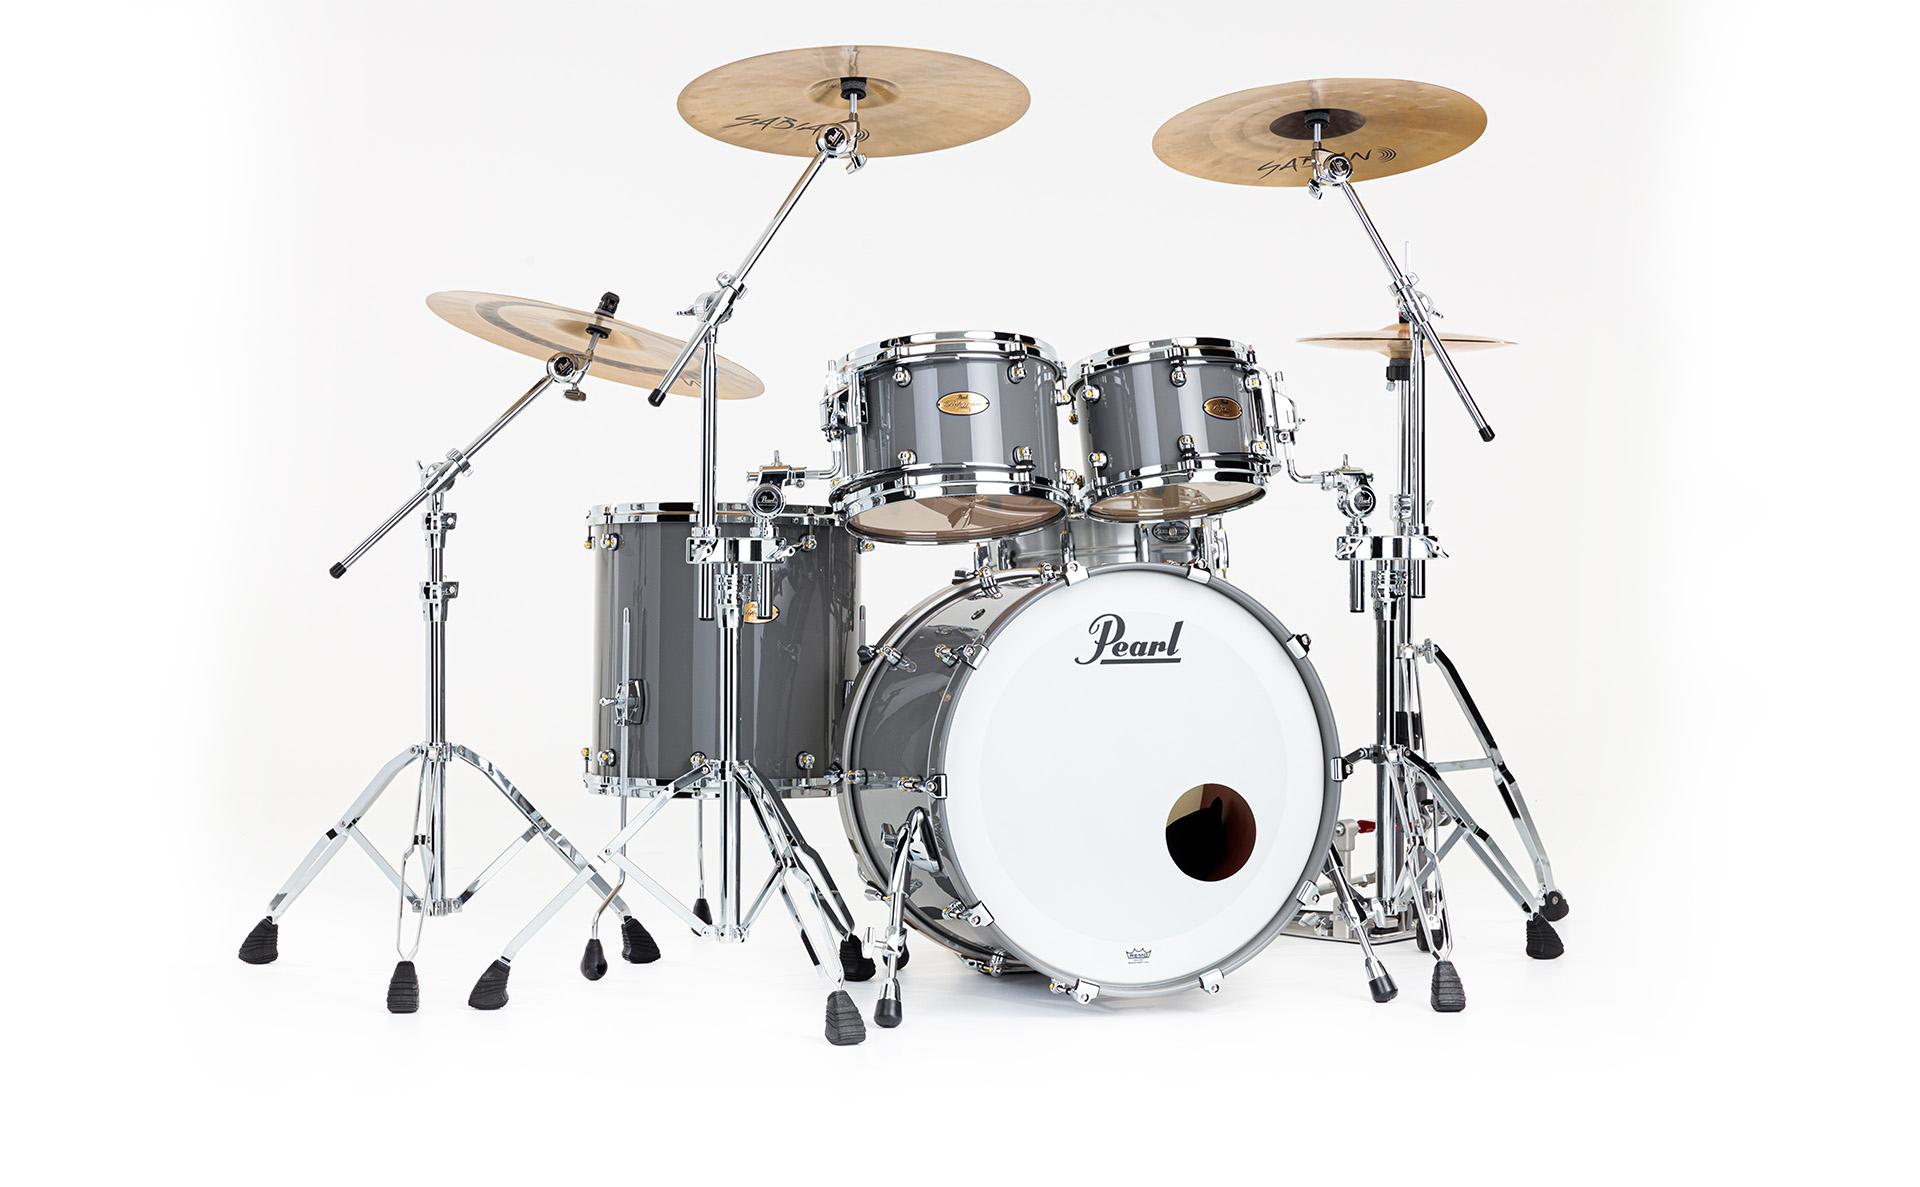 High End Reimagined - New Gear From Pearl Drums!